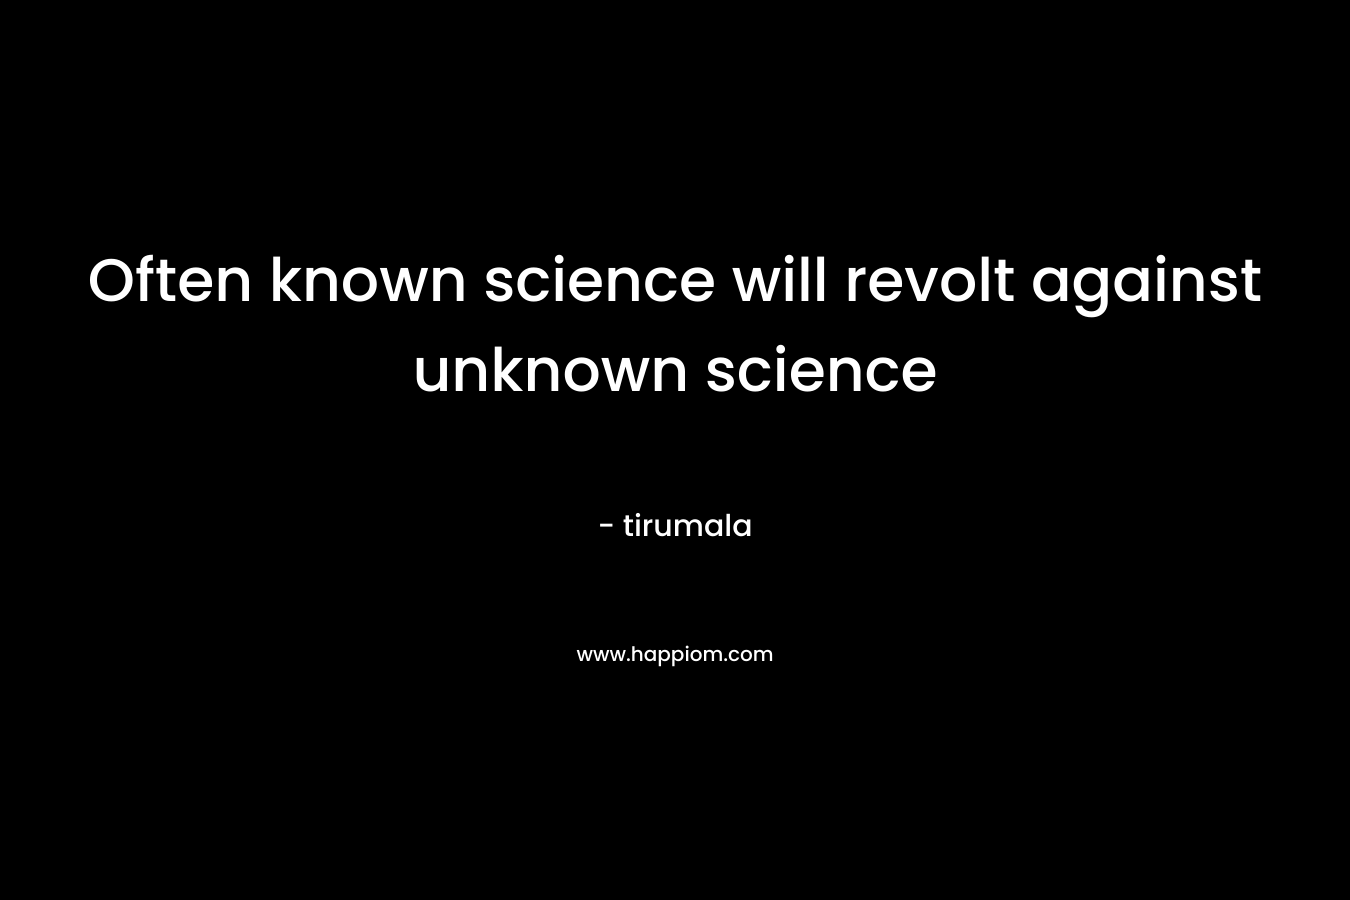 Often known science will revolt against unknown science